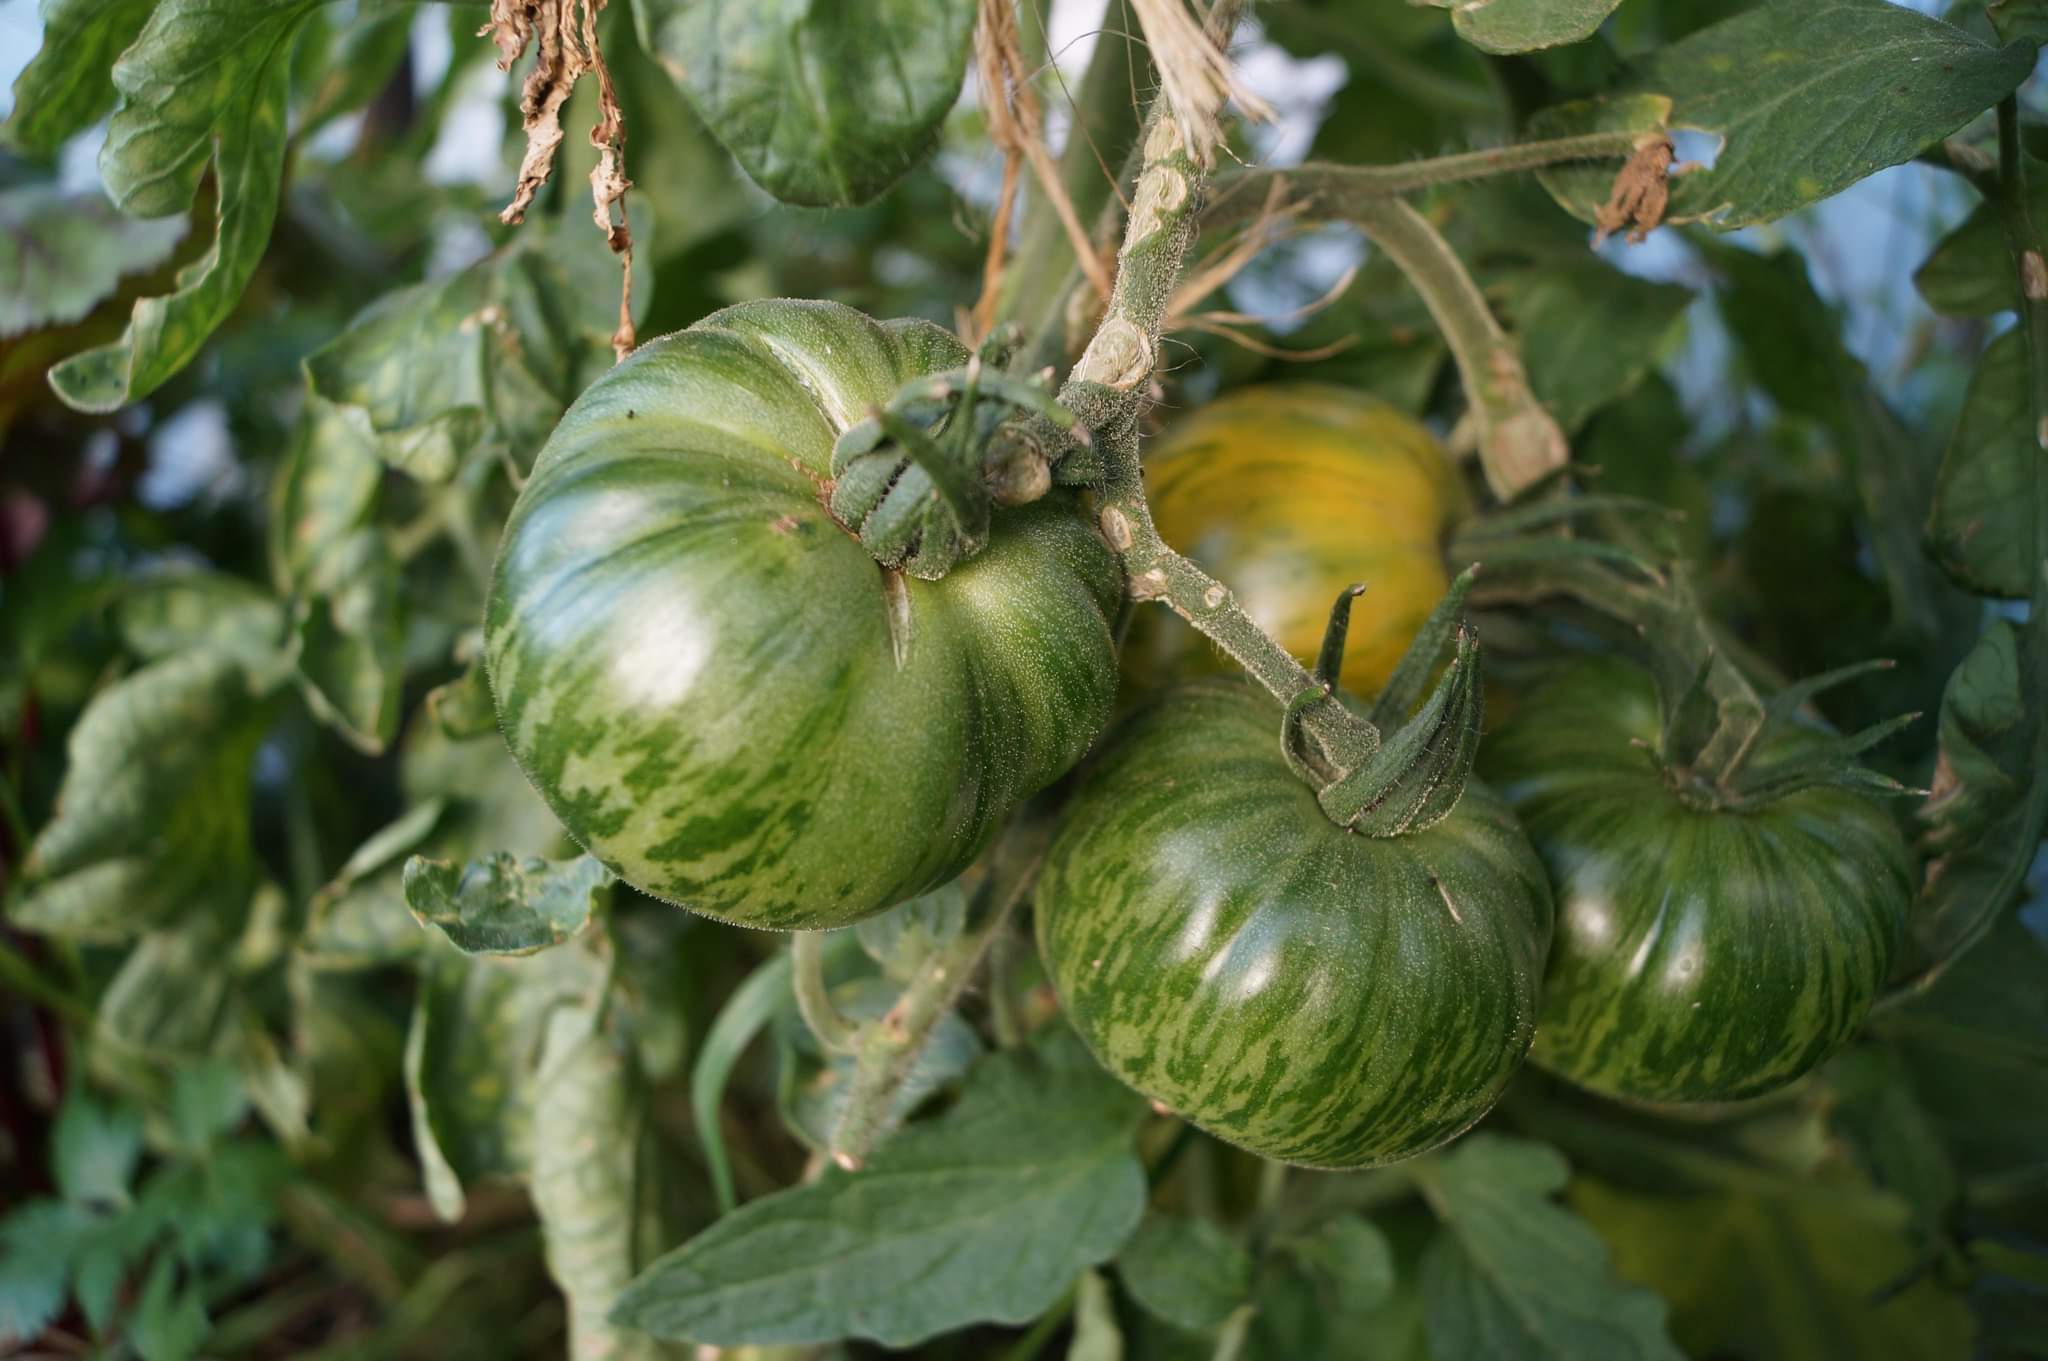 Four green tomatoes sit nestle in a bed of vines. Three of the tomatoes are speckled green, one in the back is turning a goldenrod yellow color